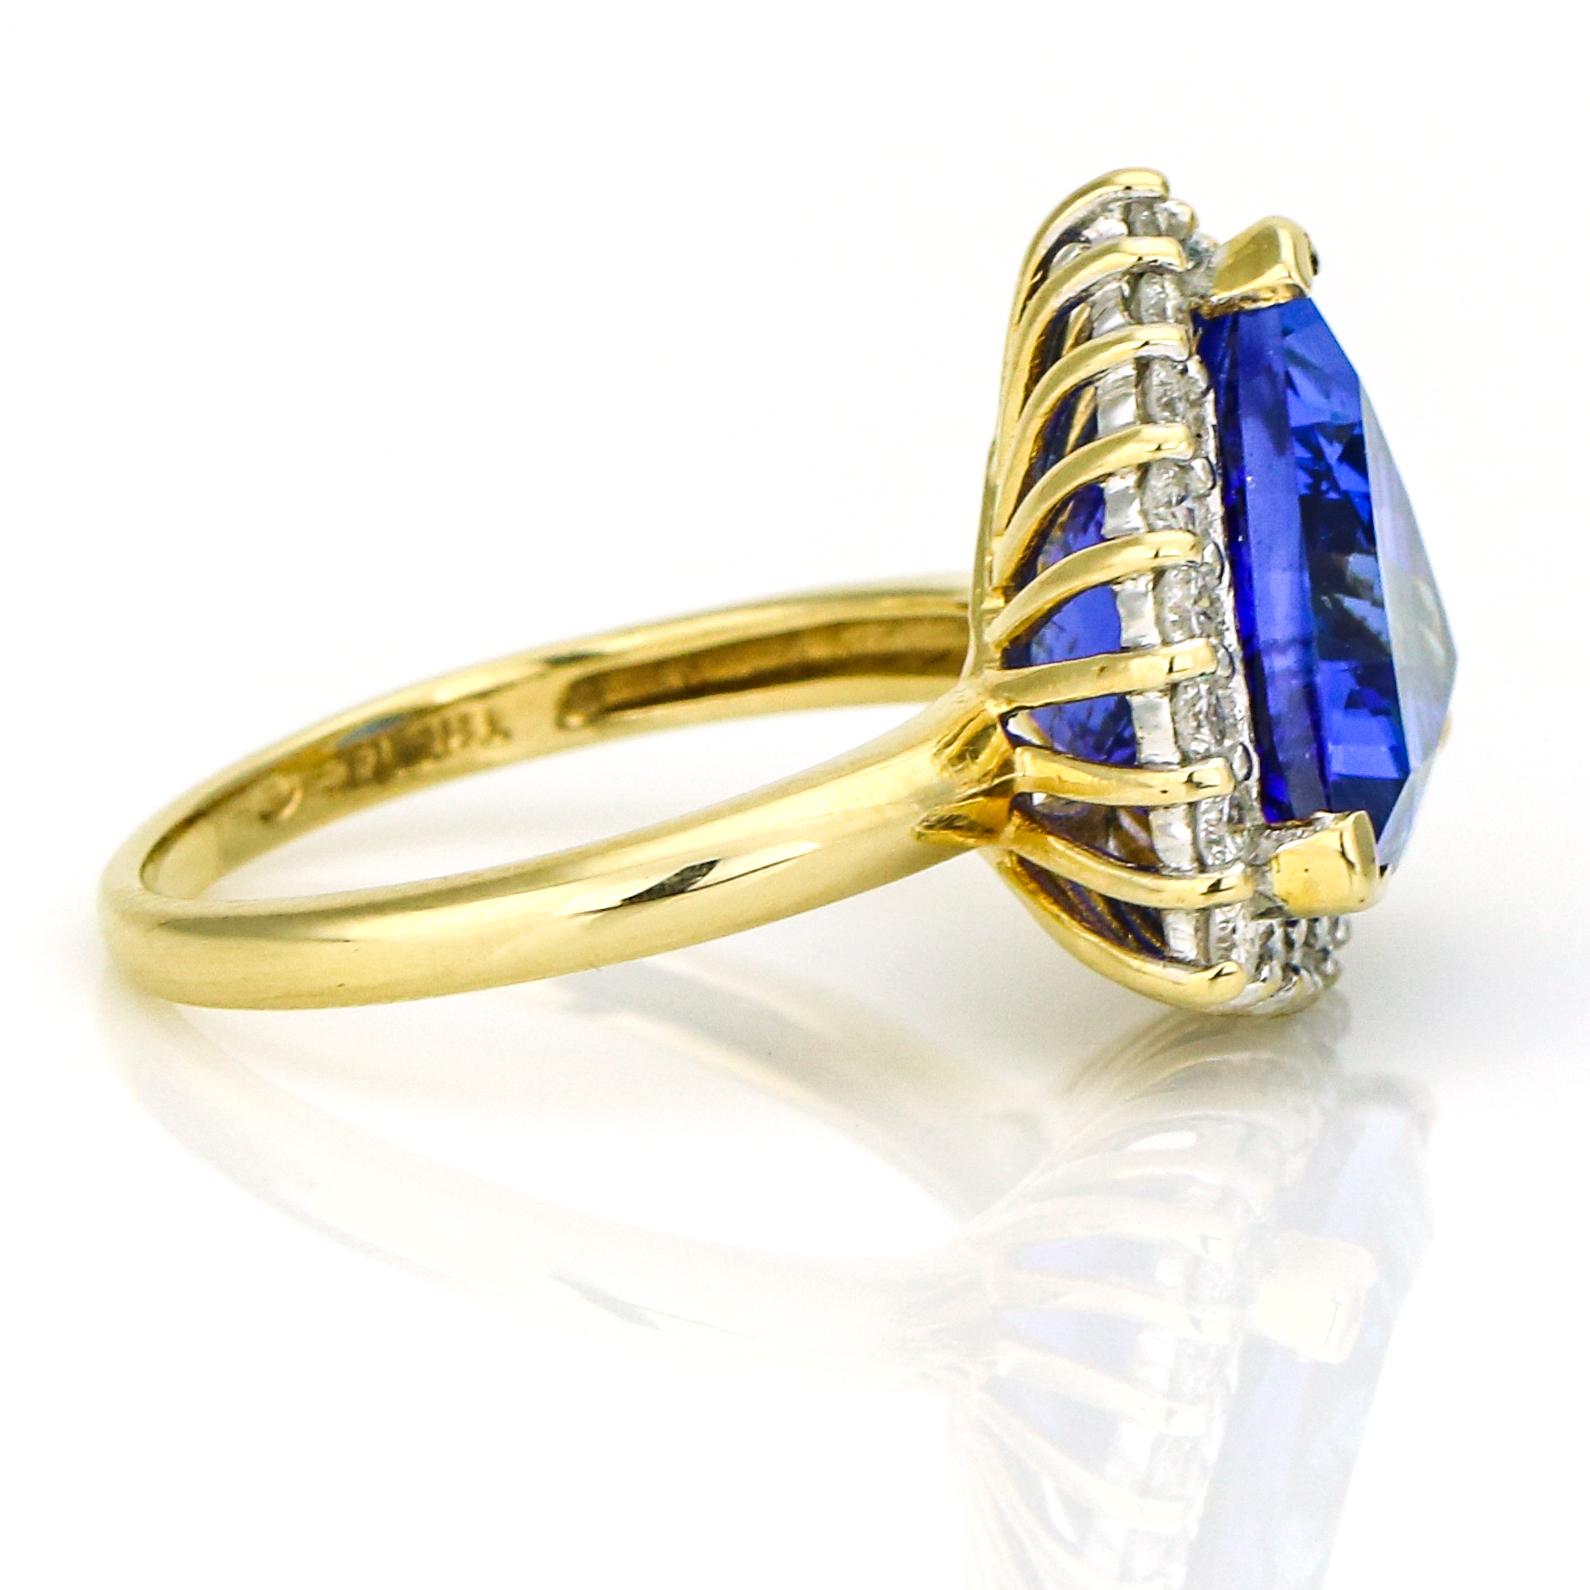 6.62 Carat 14 Karat Yellow Gold Trillion Tanzanite Diamond Cocktail Ring In Excellent Condition For Sale In Fort Lauderdale, FL